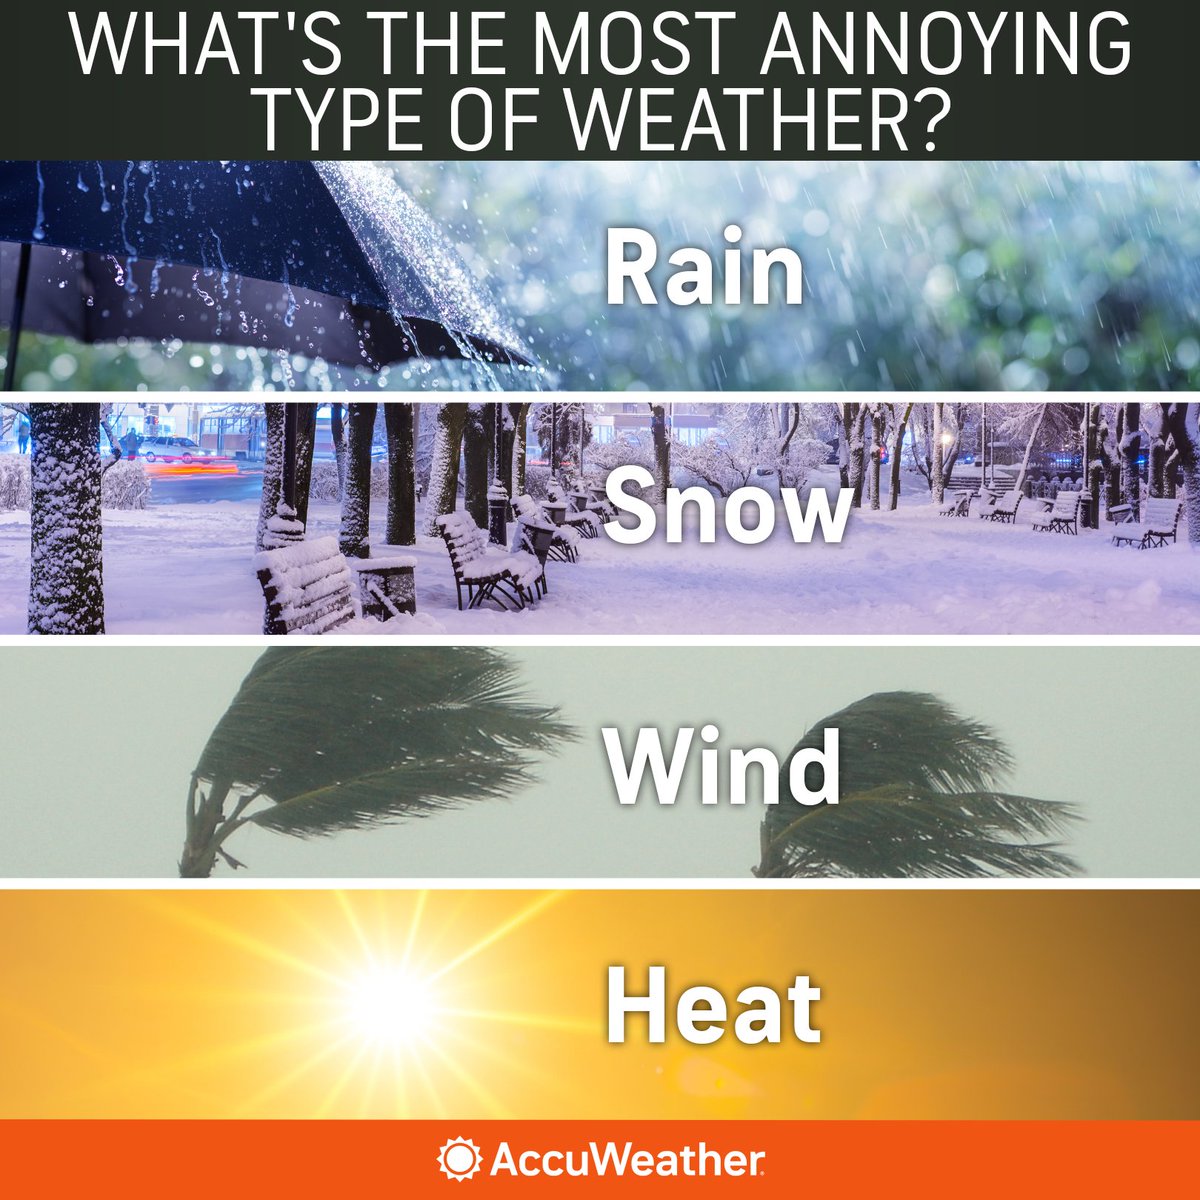 What type of weather do you find the most annoying?